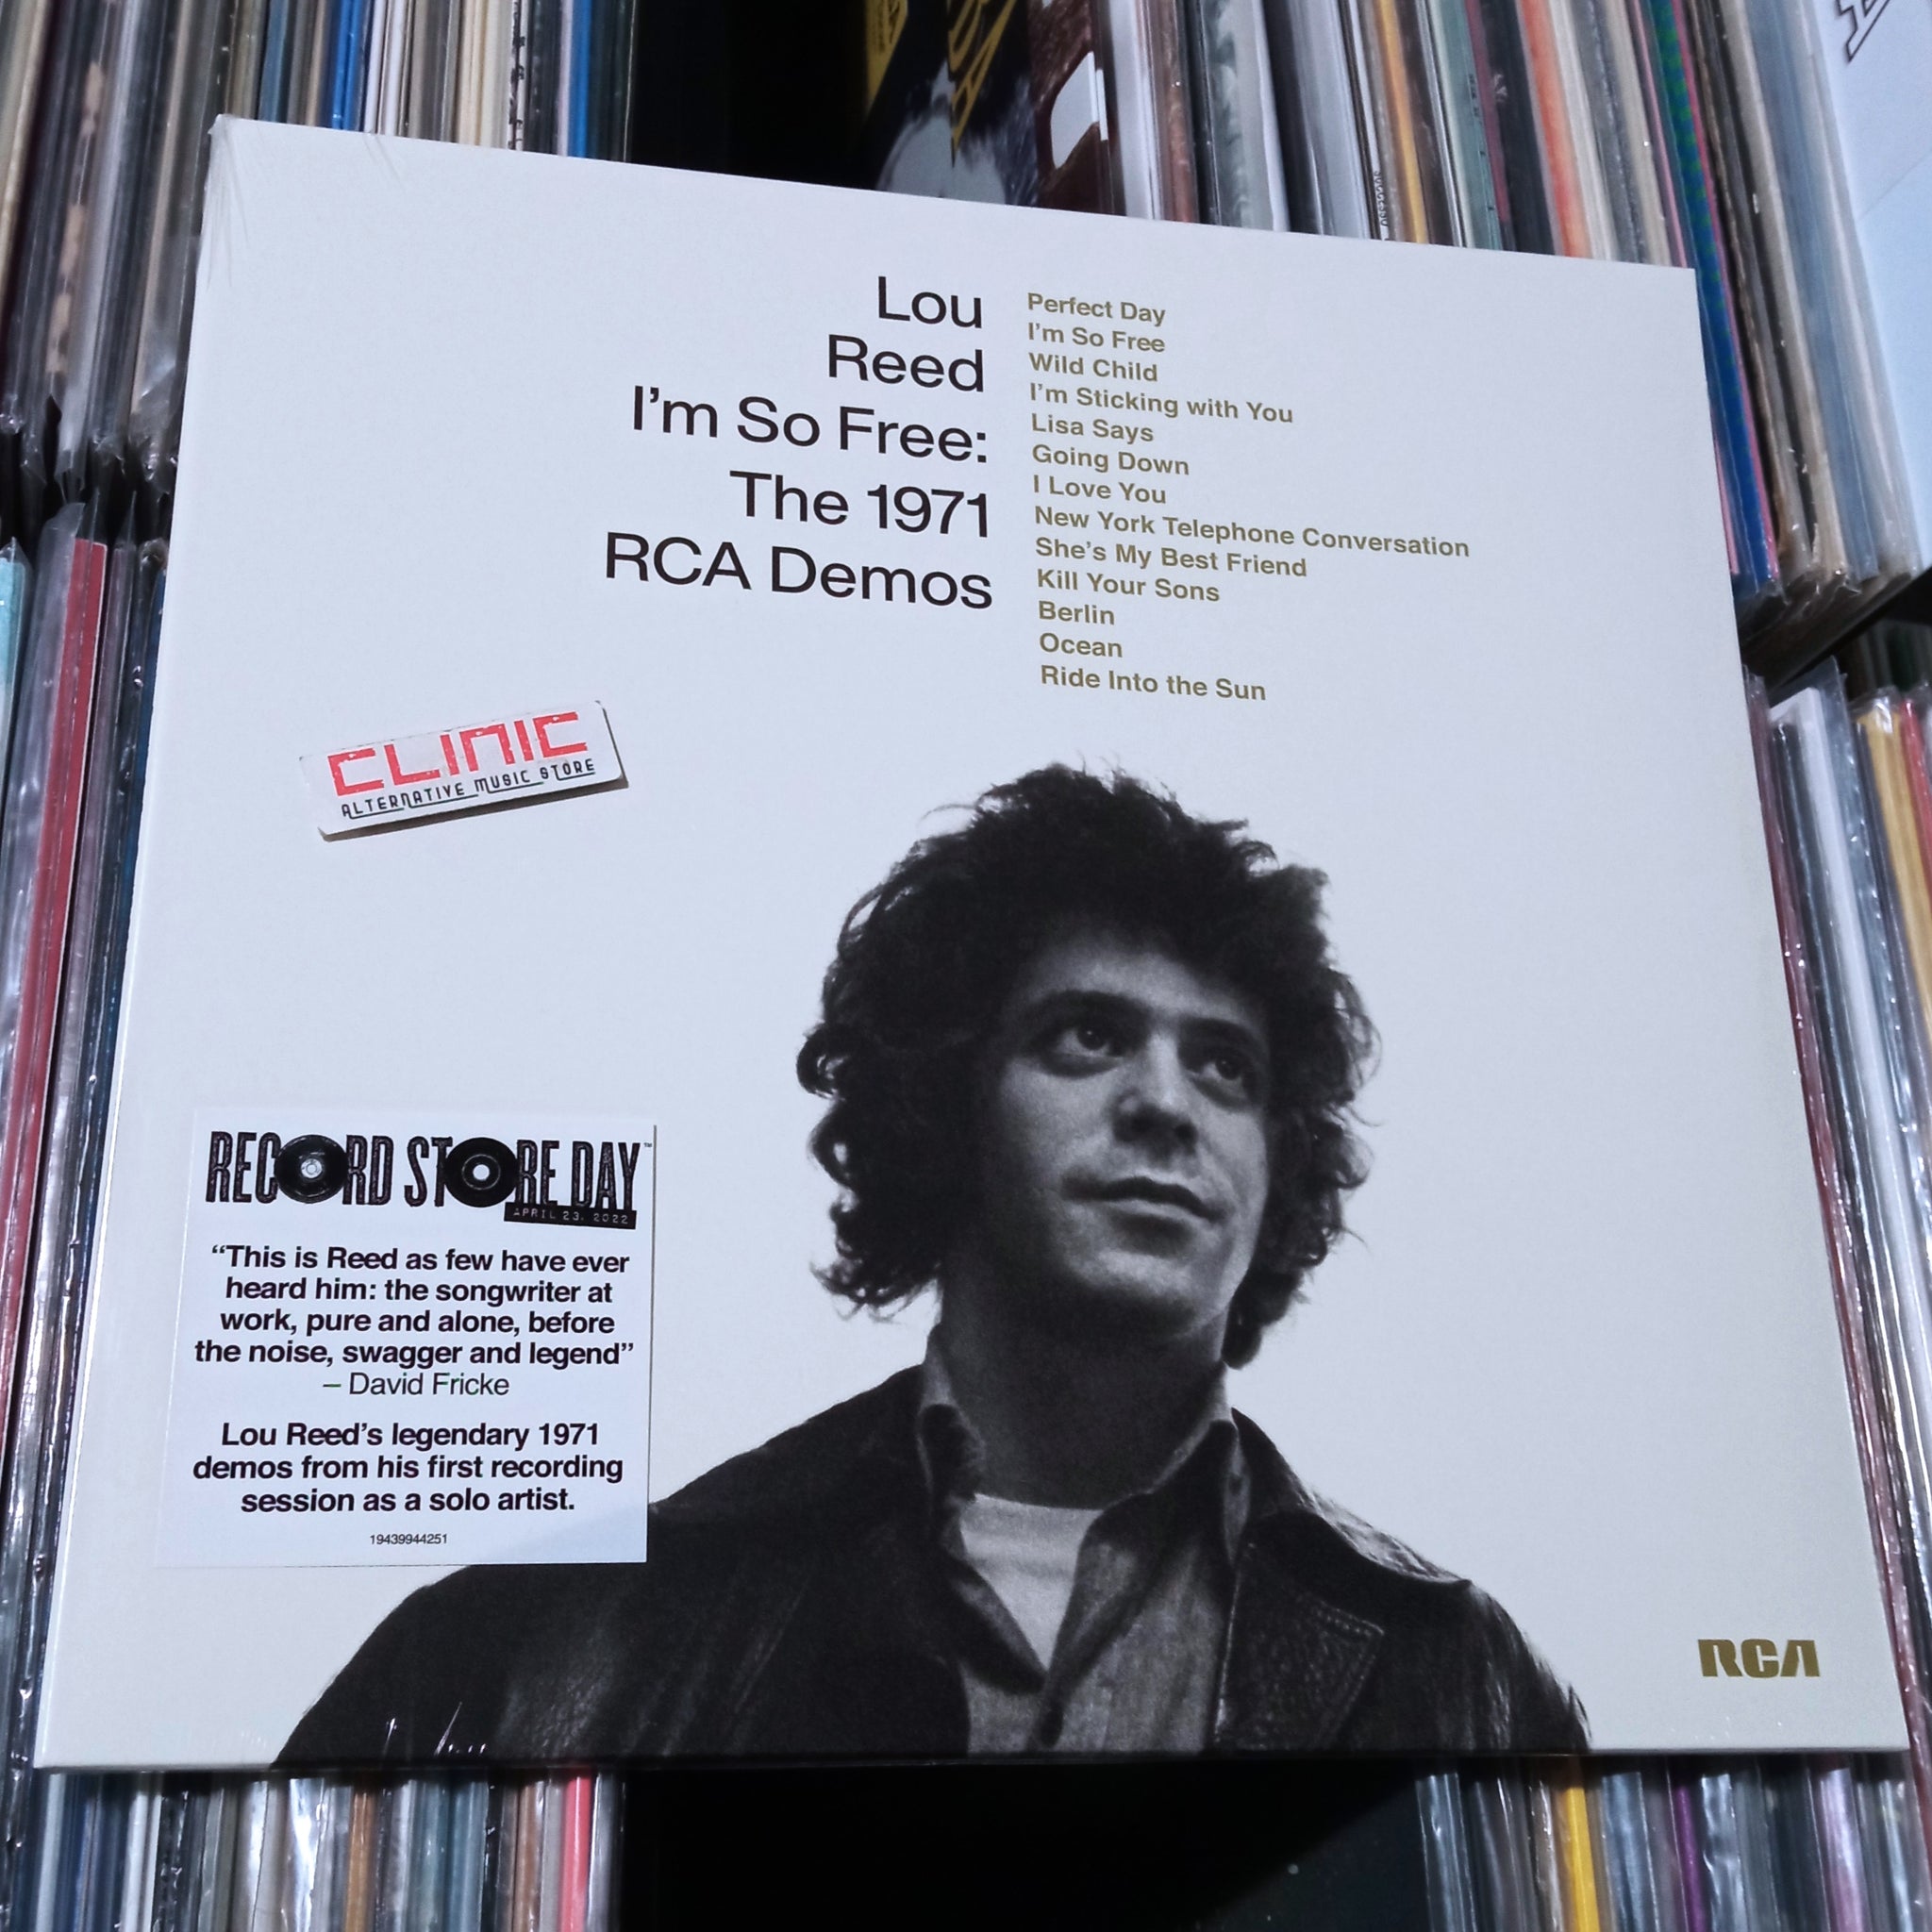 LP - LOU REED - I'M SO FREE: THE 1971 RCA DEMOS - Record Store Day